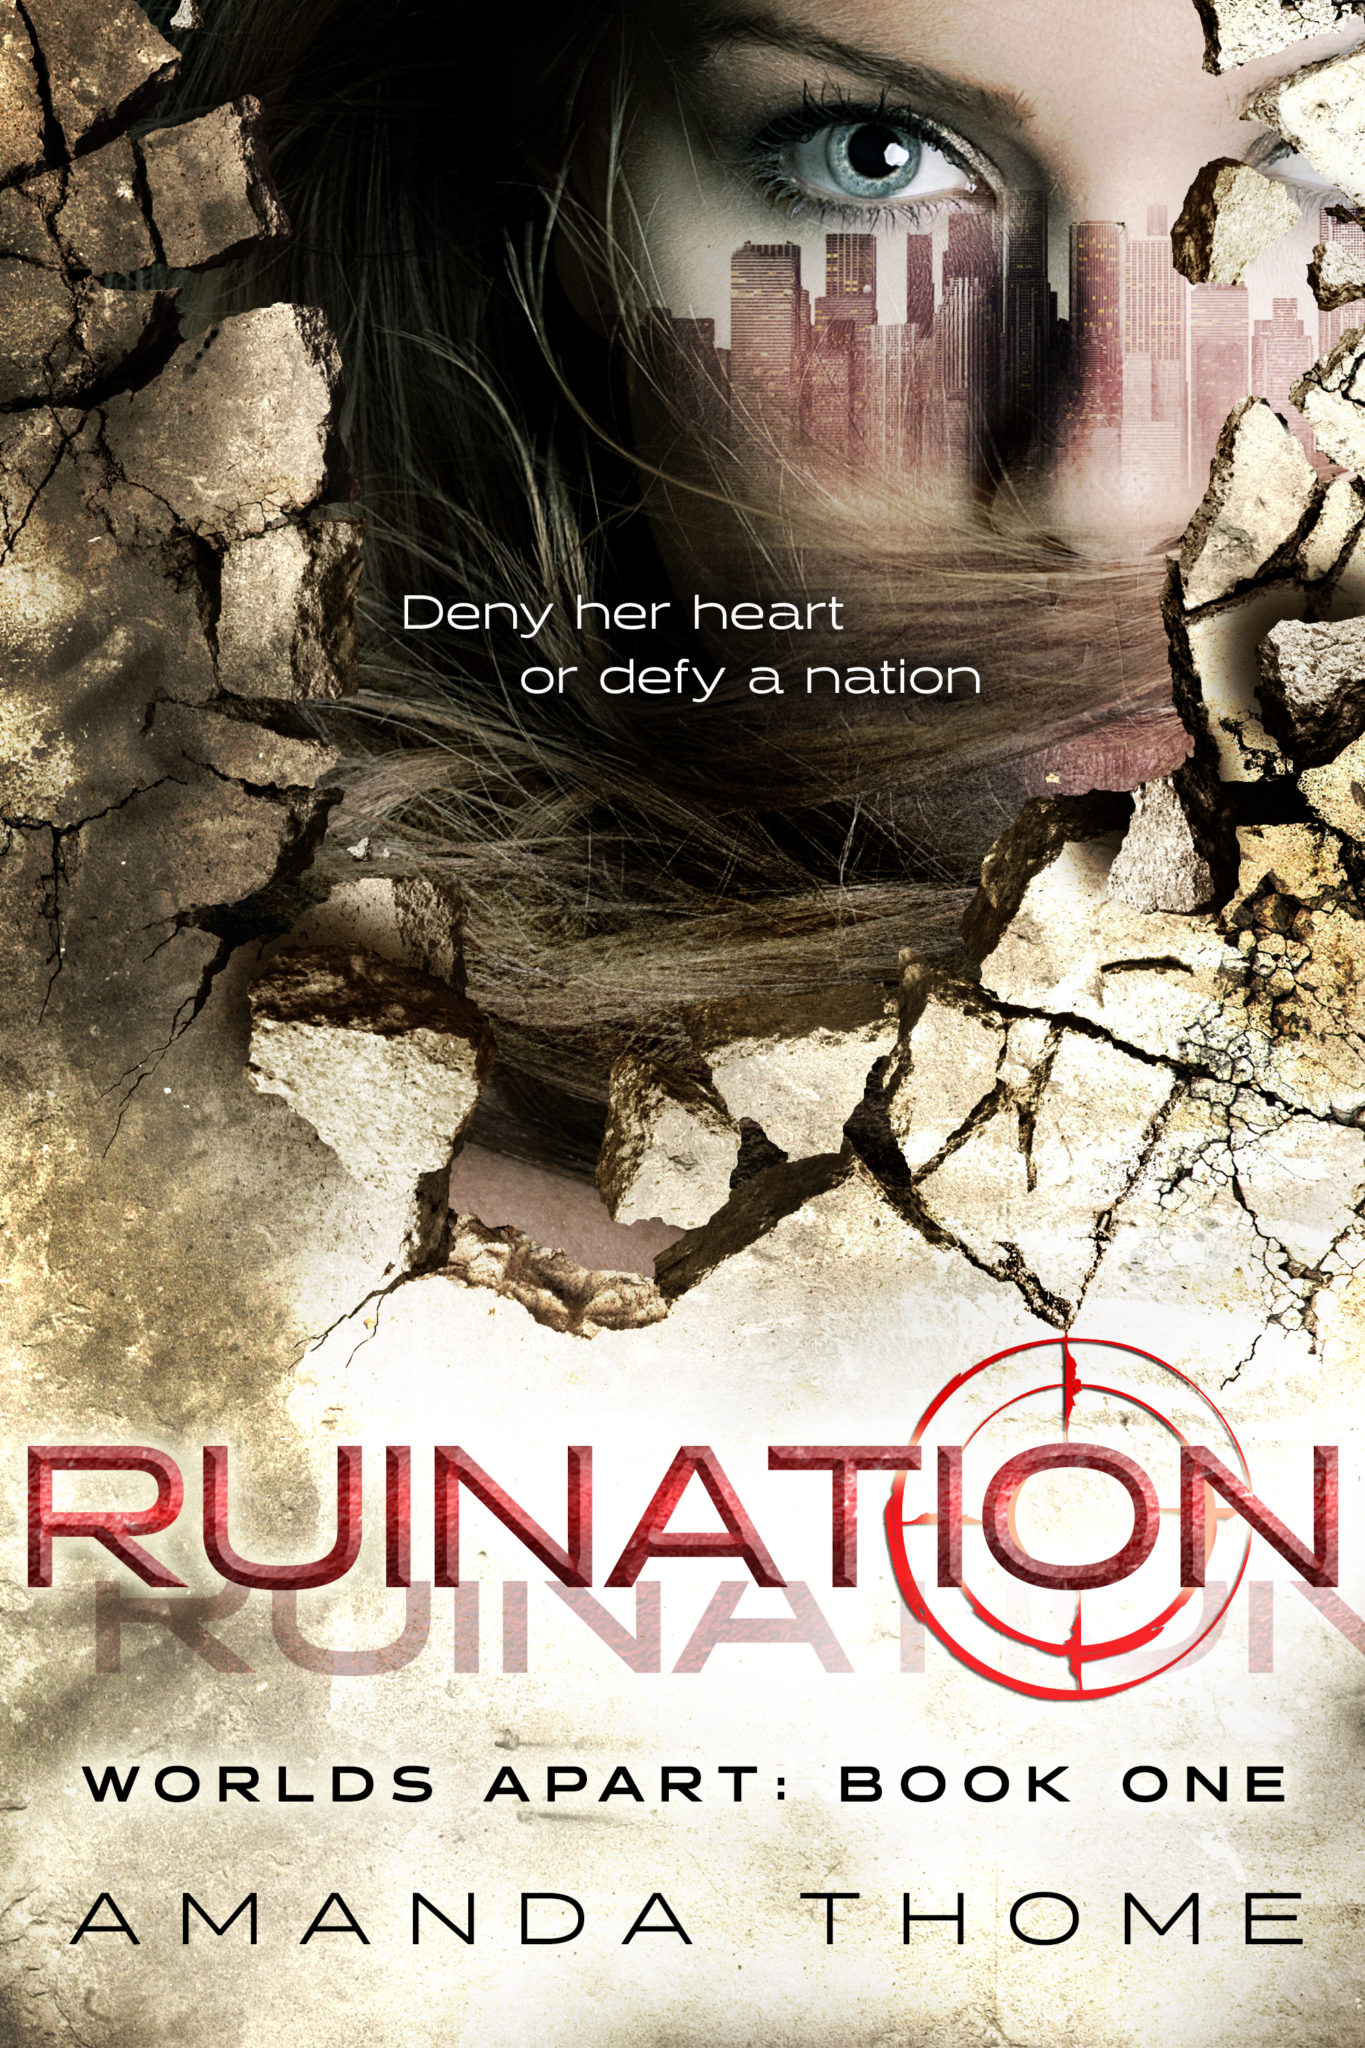 Ruination, Worlds Apart Book One by Amanda Thome